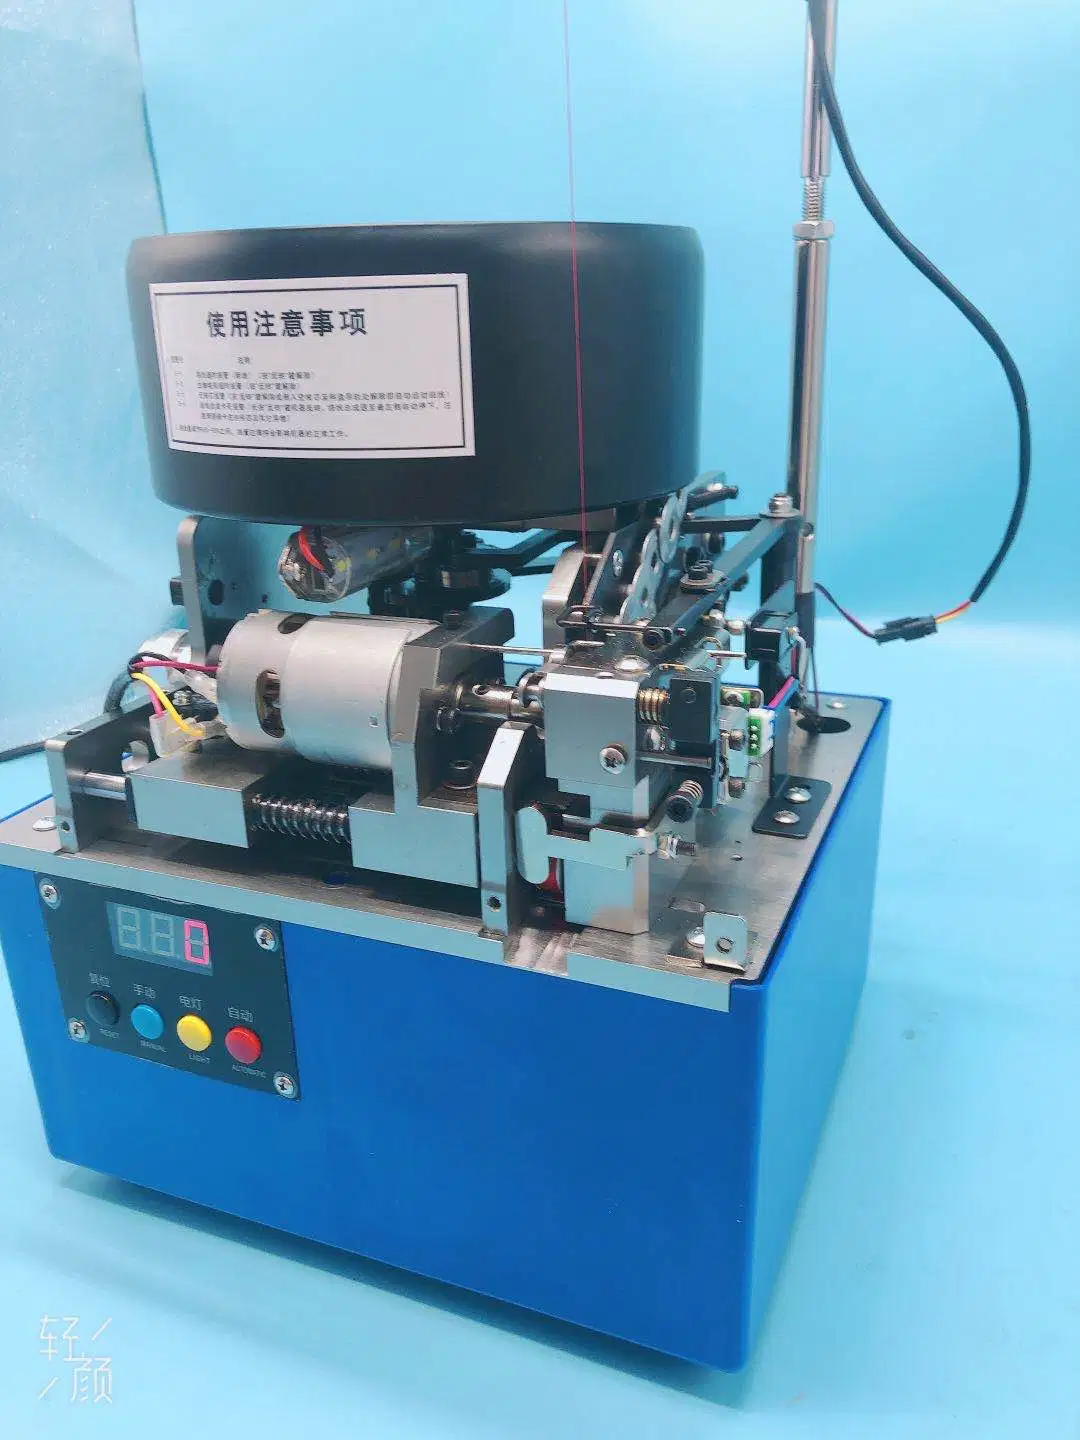 Popular Full Automatic Coil Winding Winder Machine with Quilting and Embroidery Machine